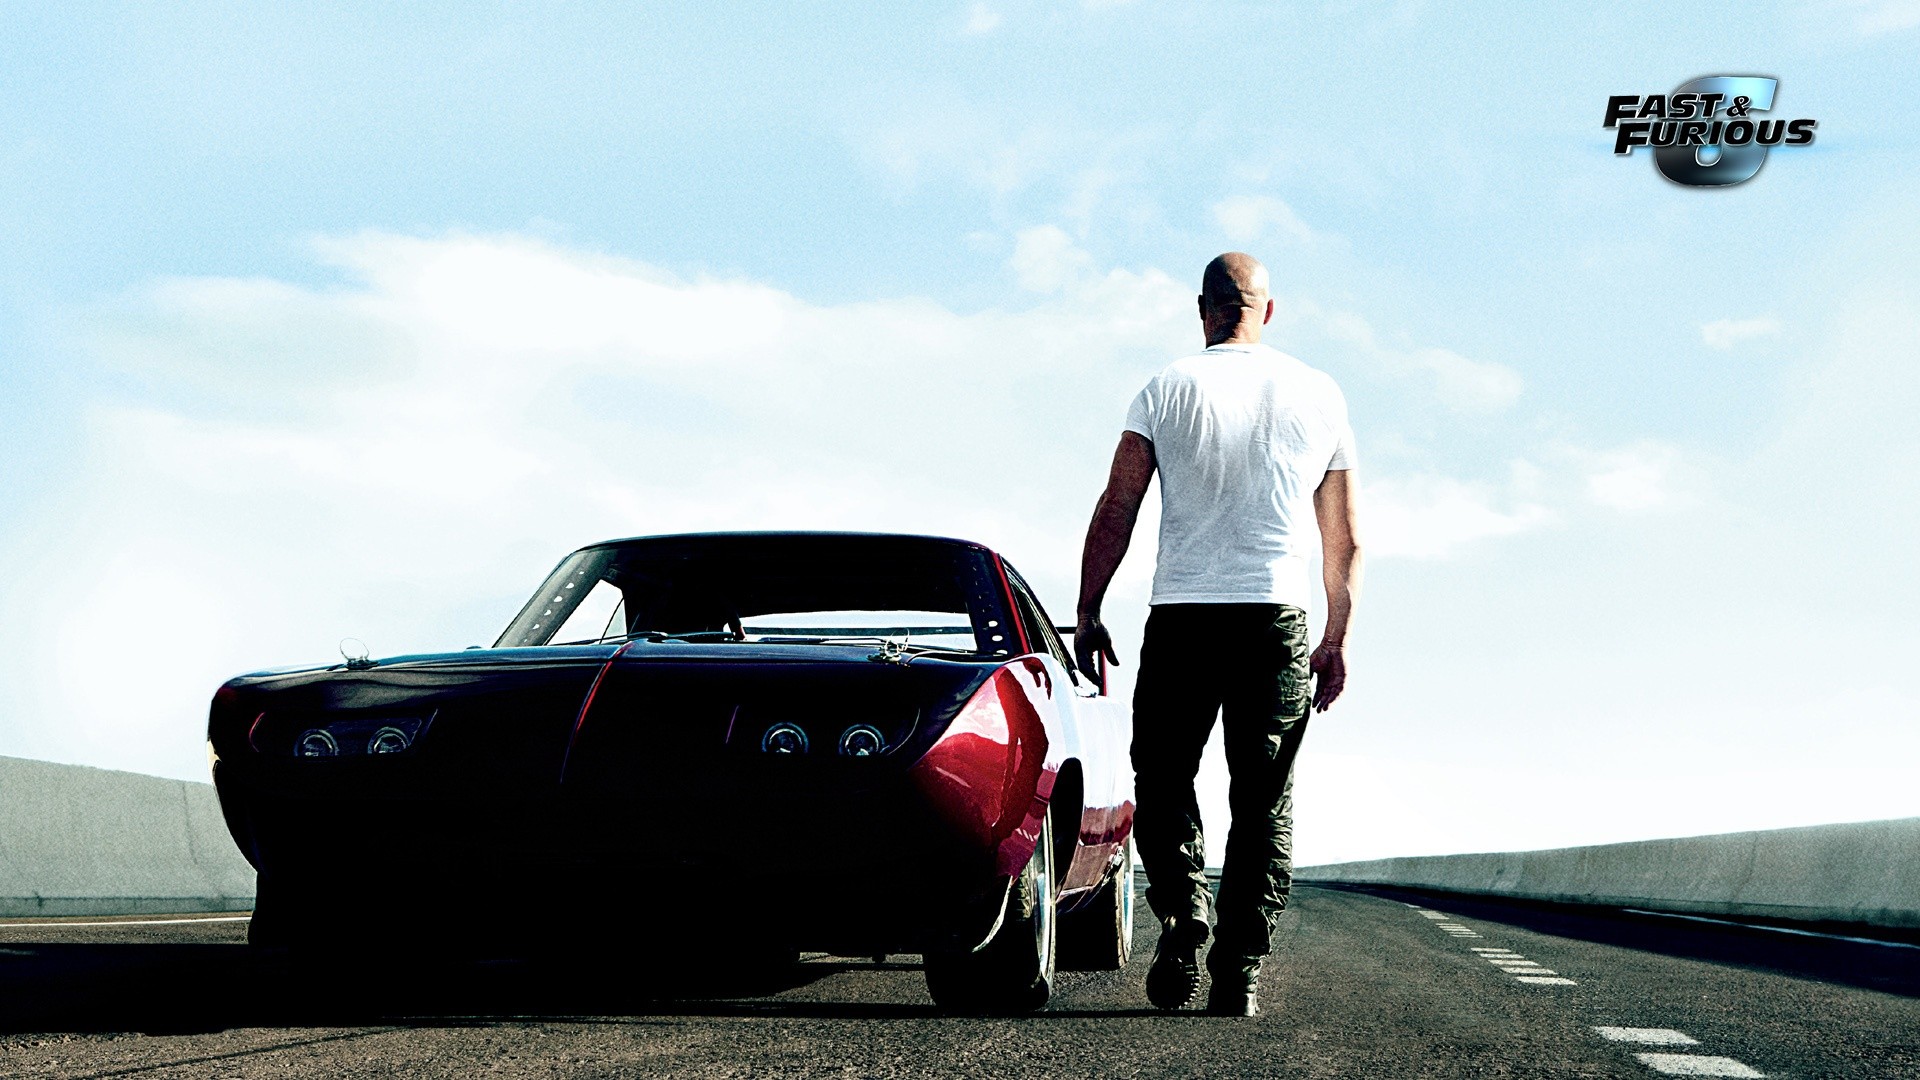 vin, Diesel, Classic, Car, Classic, Fast, Furious, Hot, Rods, Muscle Wallpaper